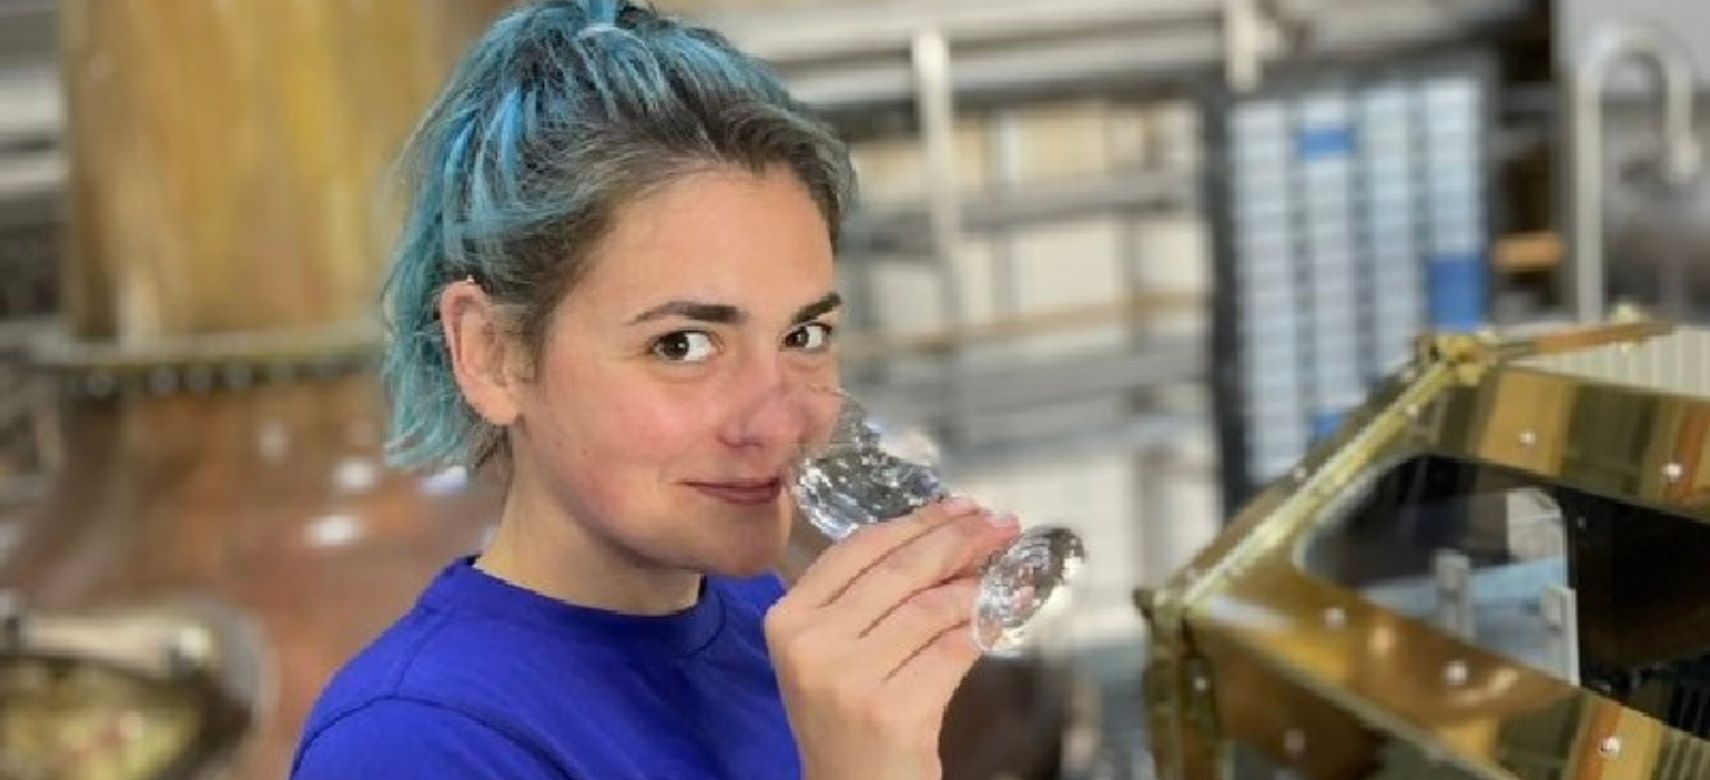 Photo for: Kira Kamateras On The Most Important Skill For A Distiller